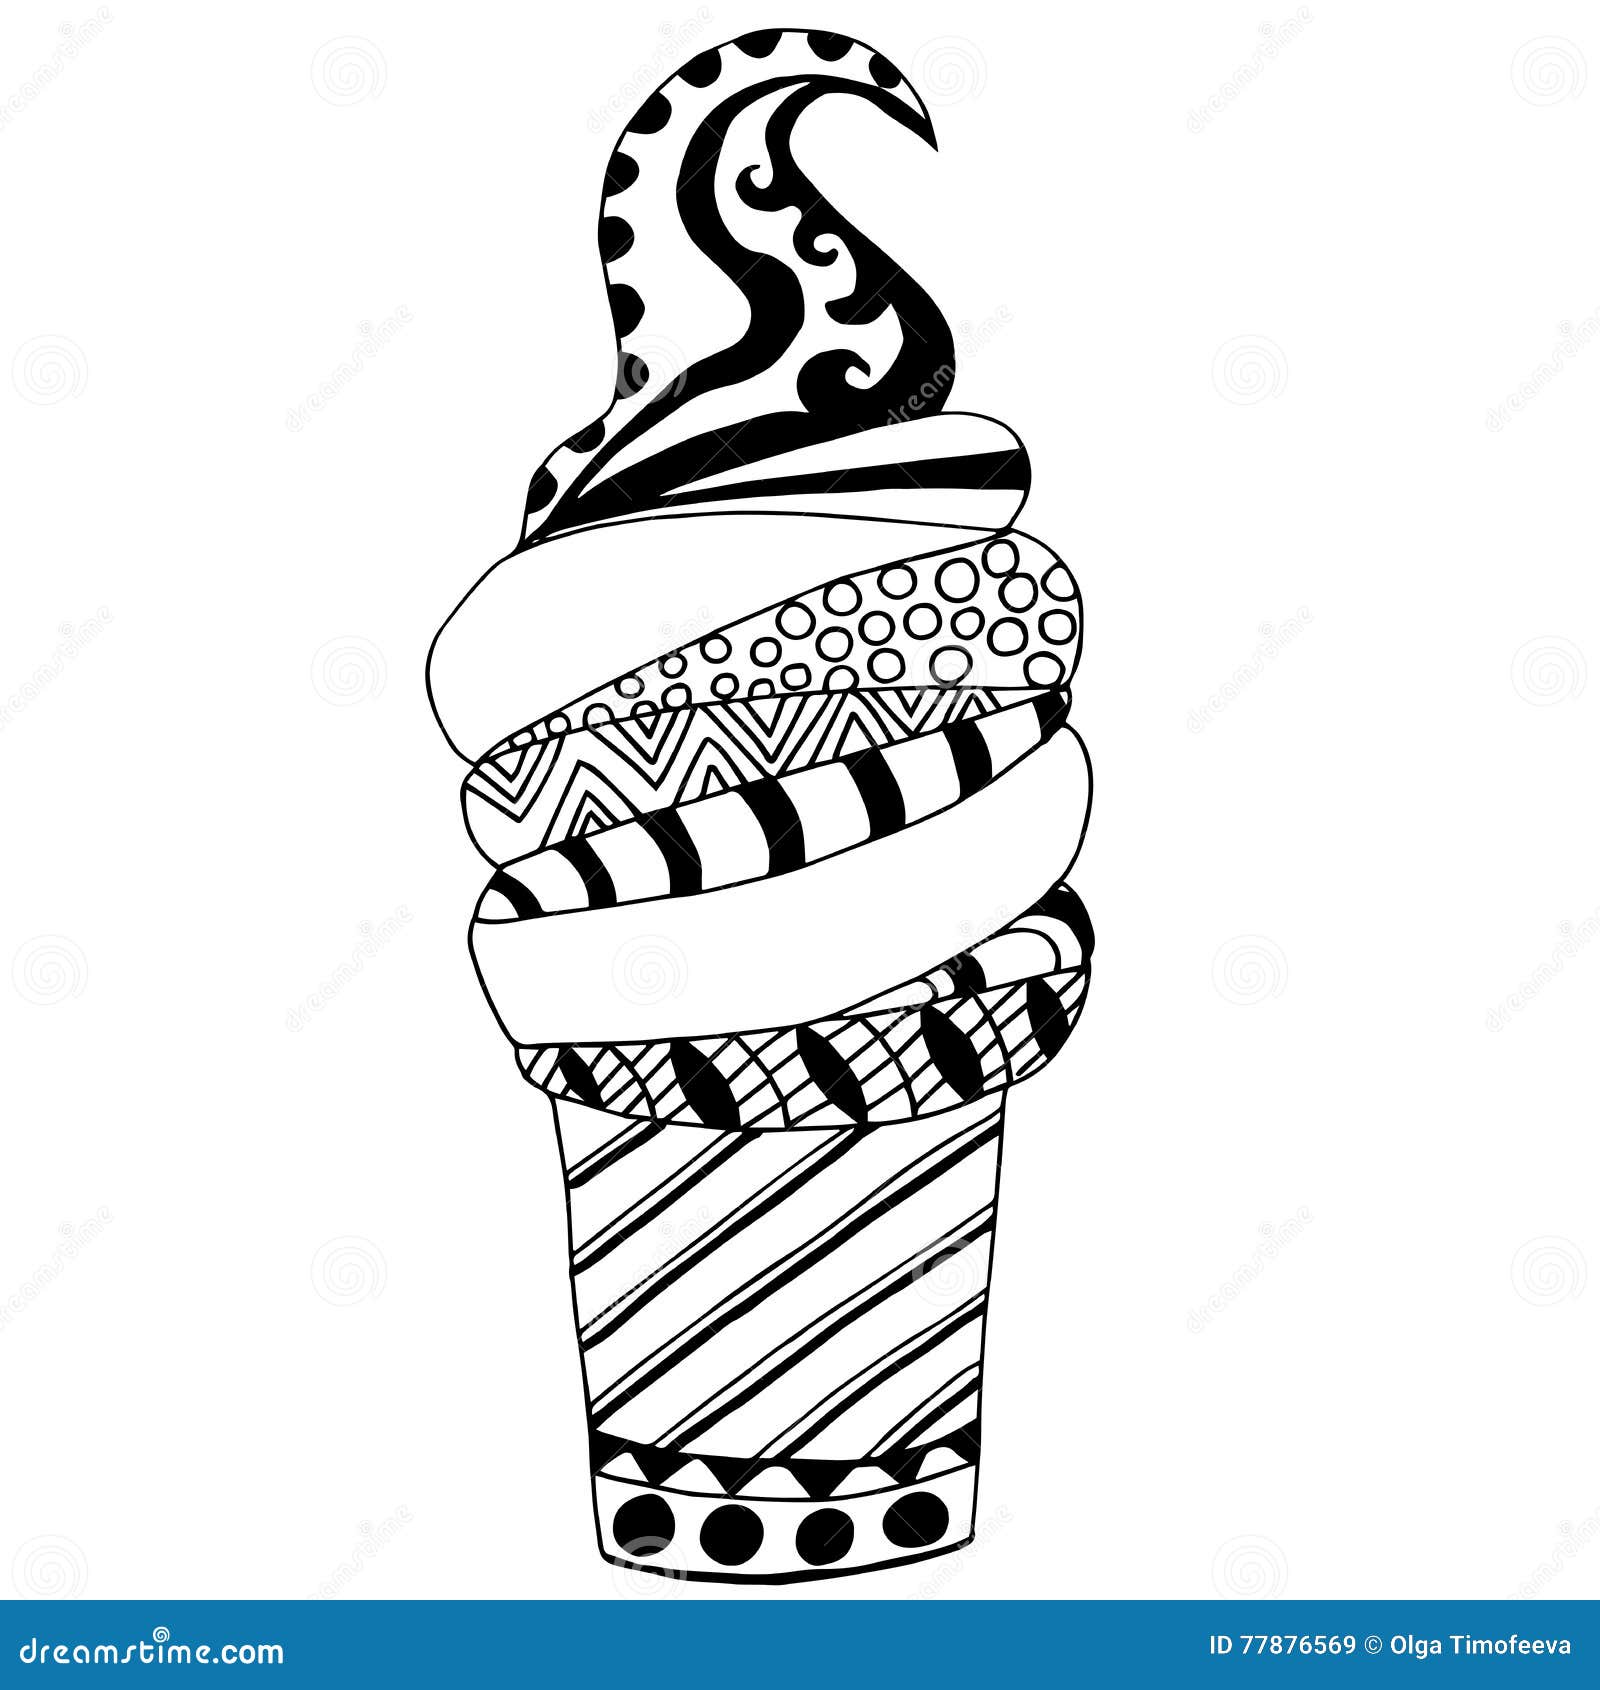 High Quality Ice Cream for Coloring with Many Elements Stock Vector ...